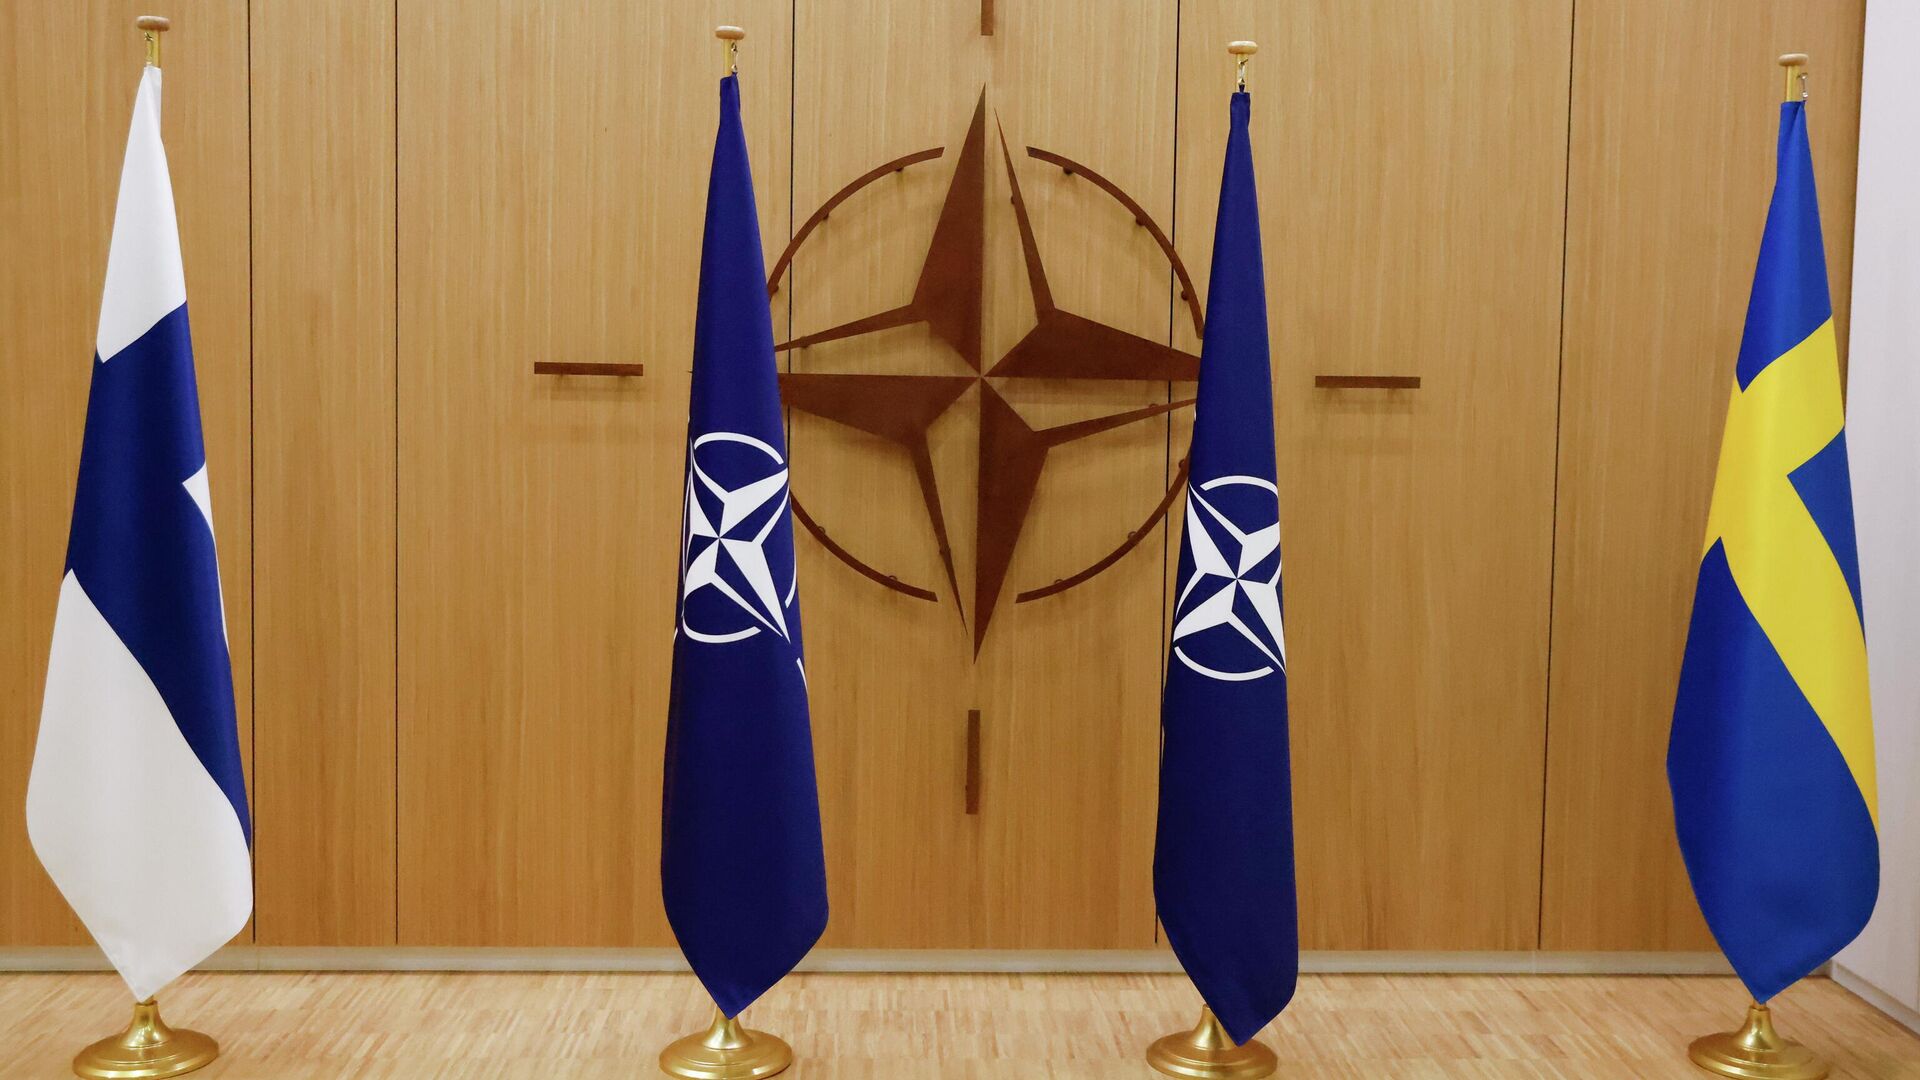 Flags of Finland, left, NATO and Sweden, right, are displayed during a ceremony to mark Sweden's and Finland's application for membership in Brussels, Belgium, Wednesday May 18, 2022. NATO Secretary-General Jens Stoltenberg said that the military alliance stands ready to seize a historic moment and move quickly on allowing Finland and Sweden to join its ranks, after the two countries submitted their membership requests. (Johanna Geron/Pool via AP) - Sputnik International, 1920, 17.03.2023